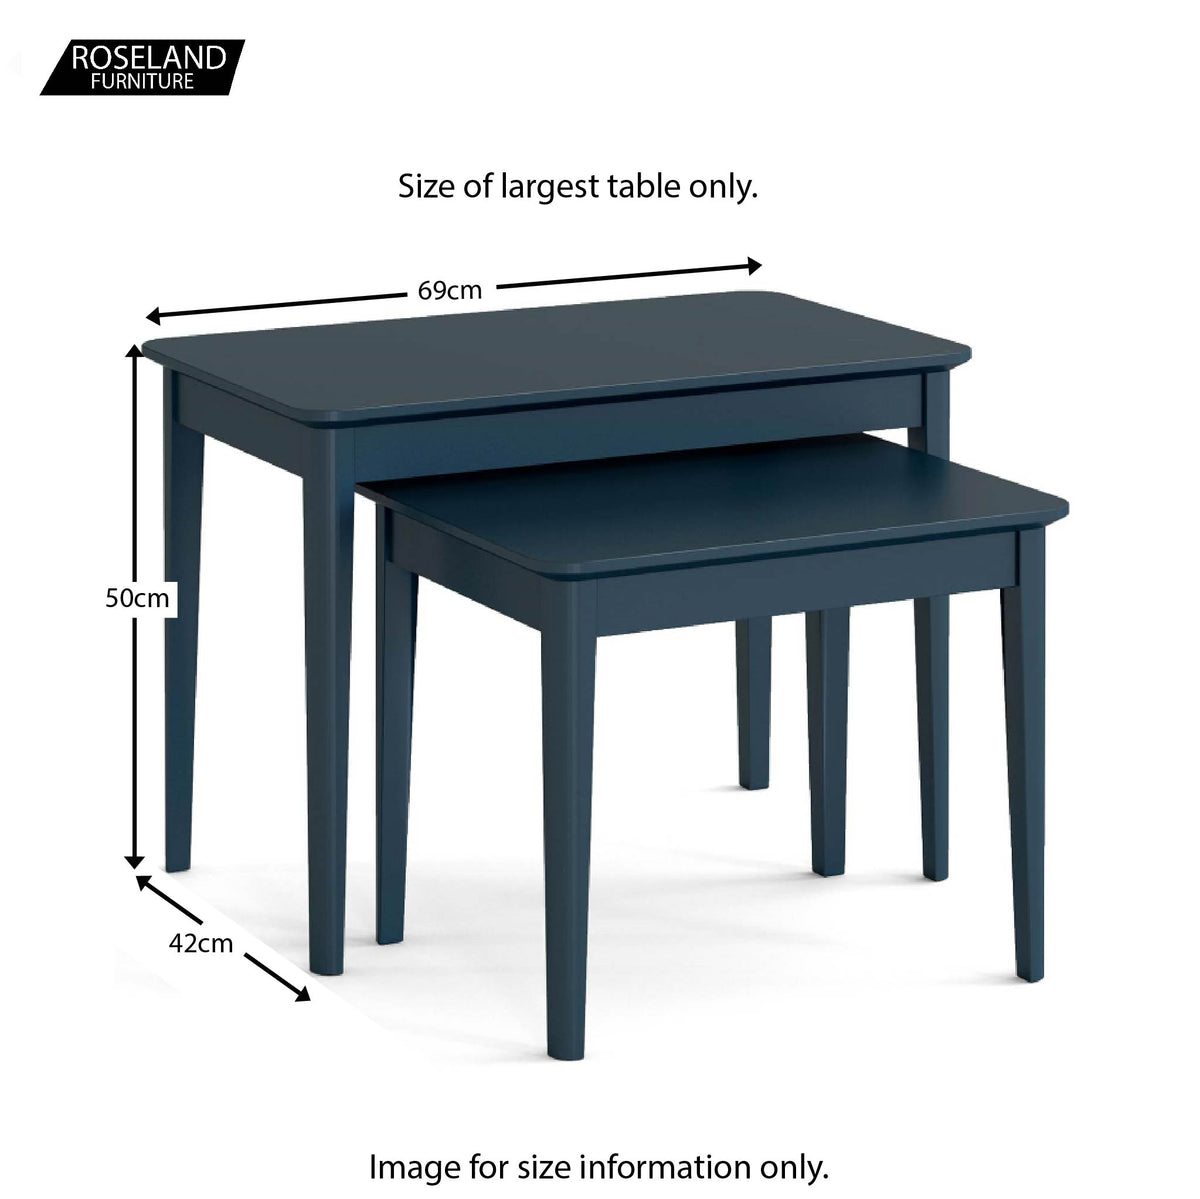 Stirling Blue Nest of Tables size guide